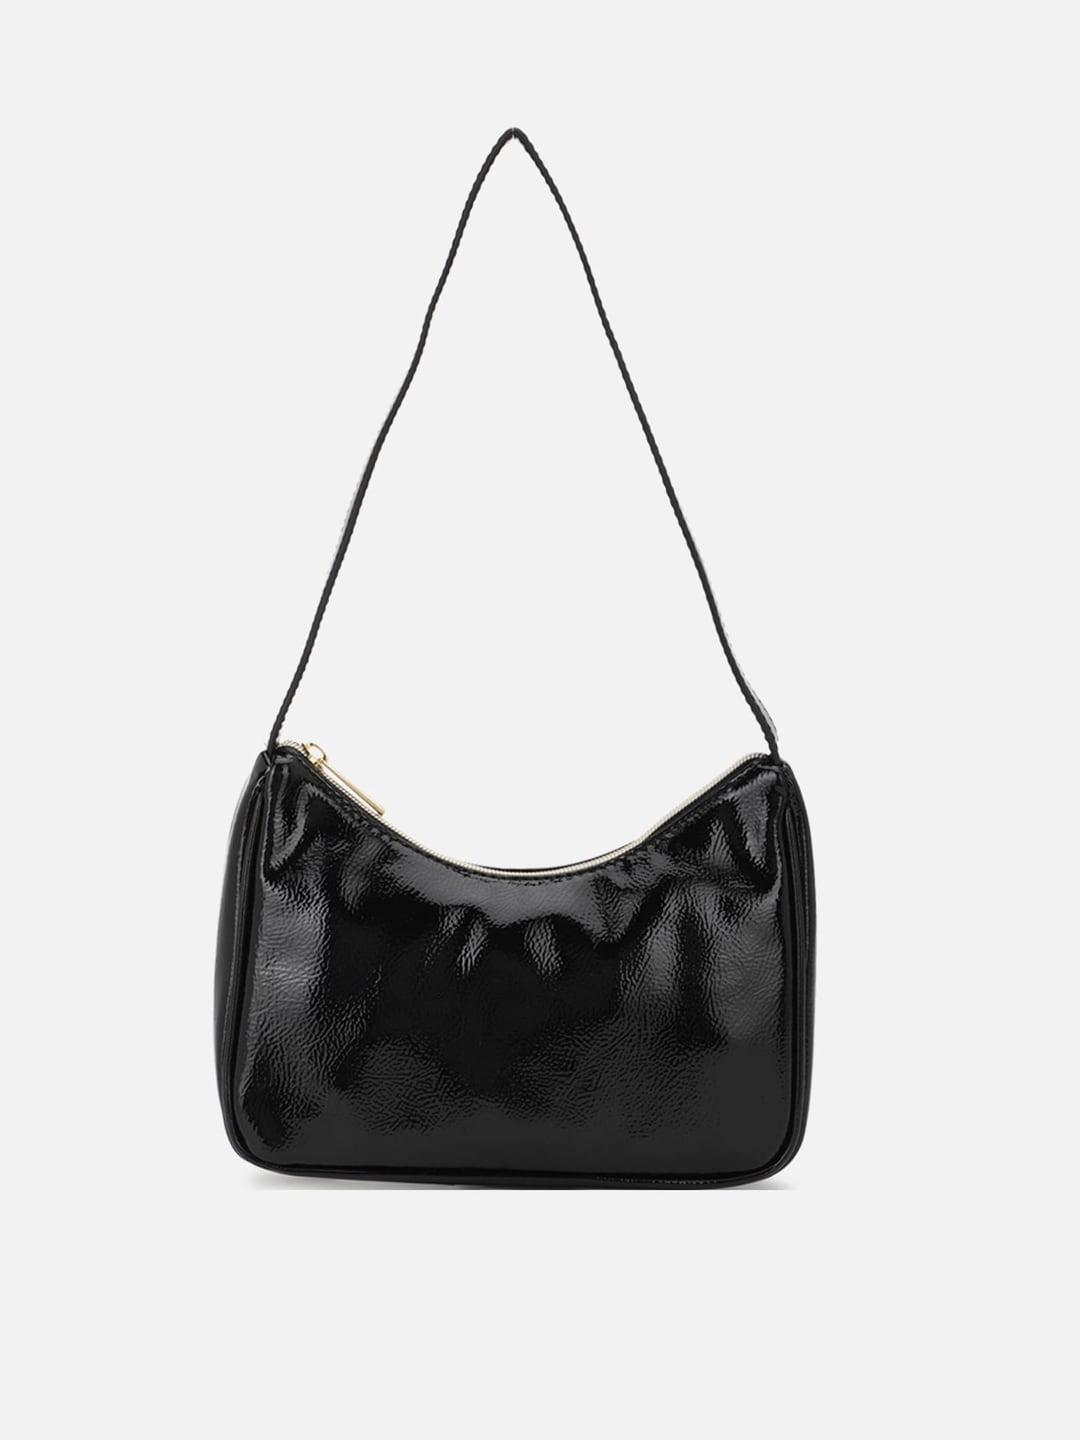 FOREVER 21 Black PU Structured Sling Bag with Quilted Price in India